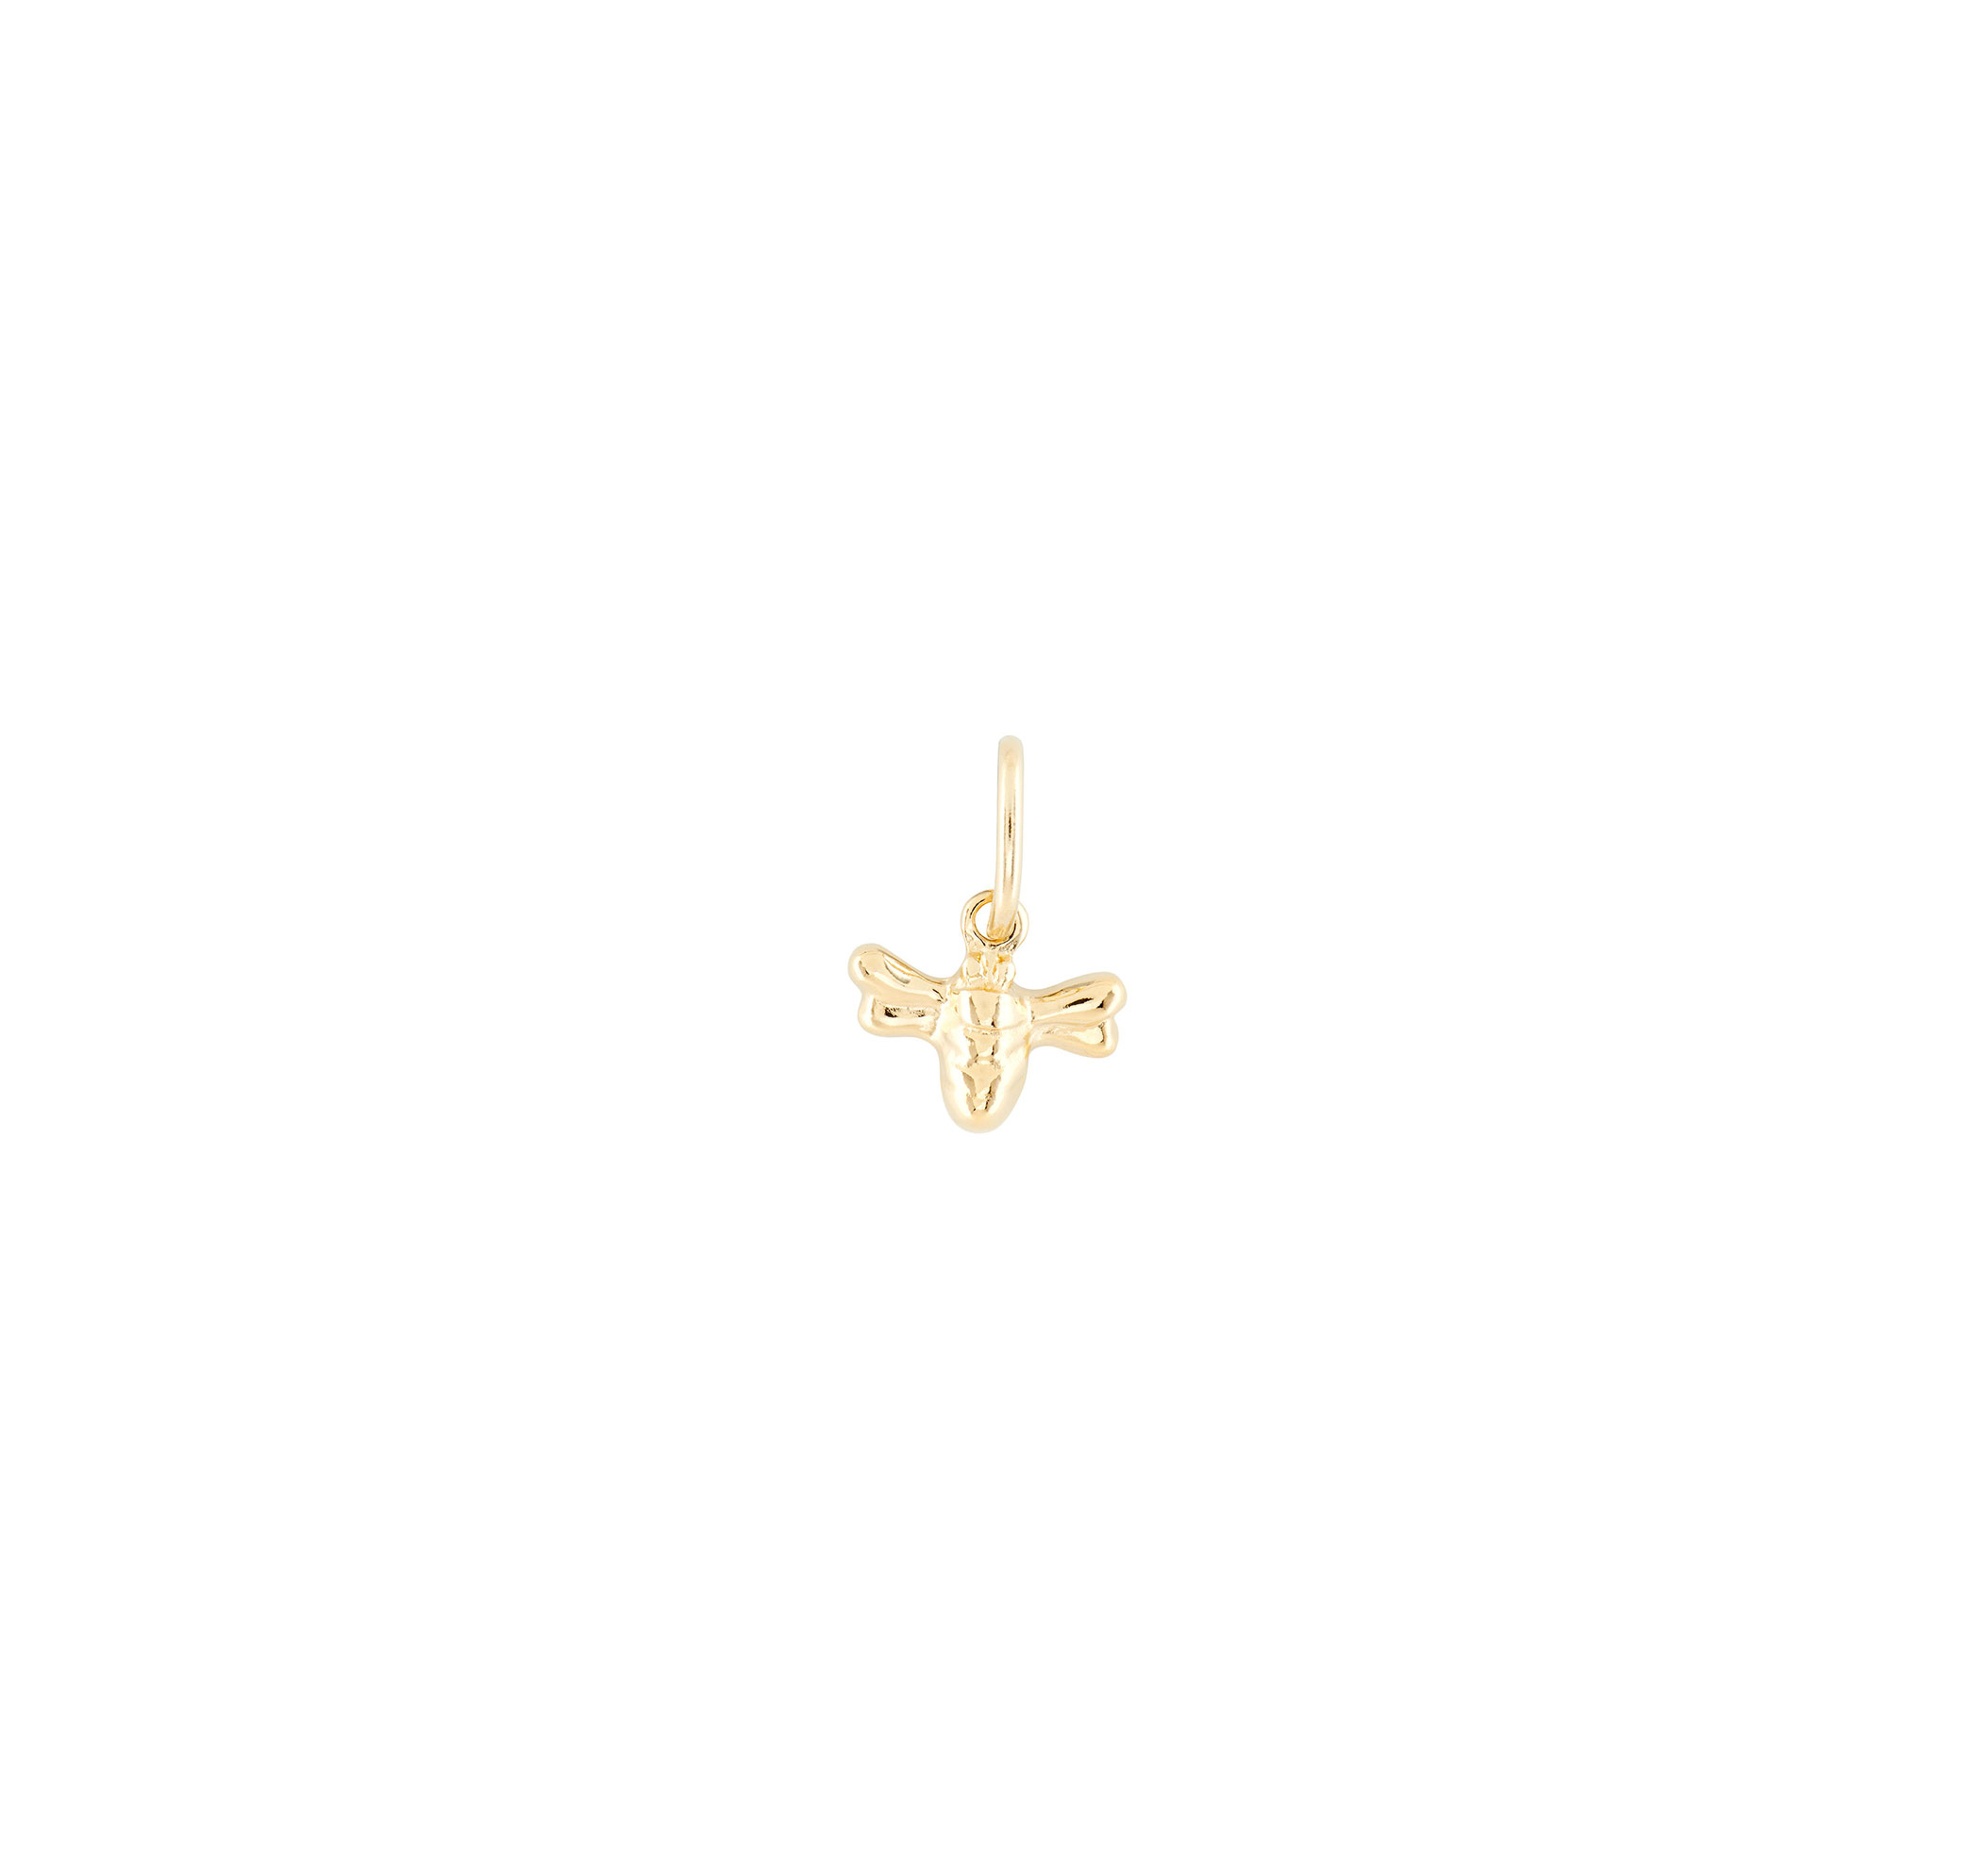 UNODE50 GOLD TONE SILVER PLATED BEE CHARM